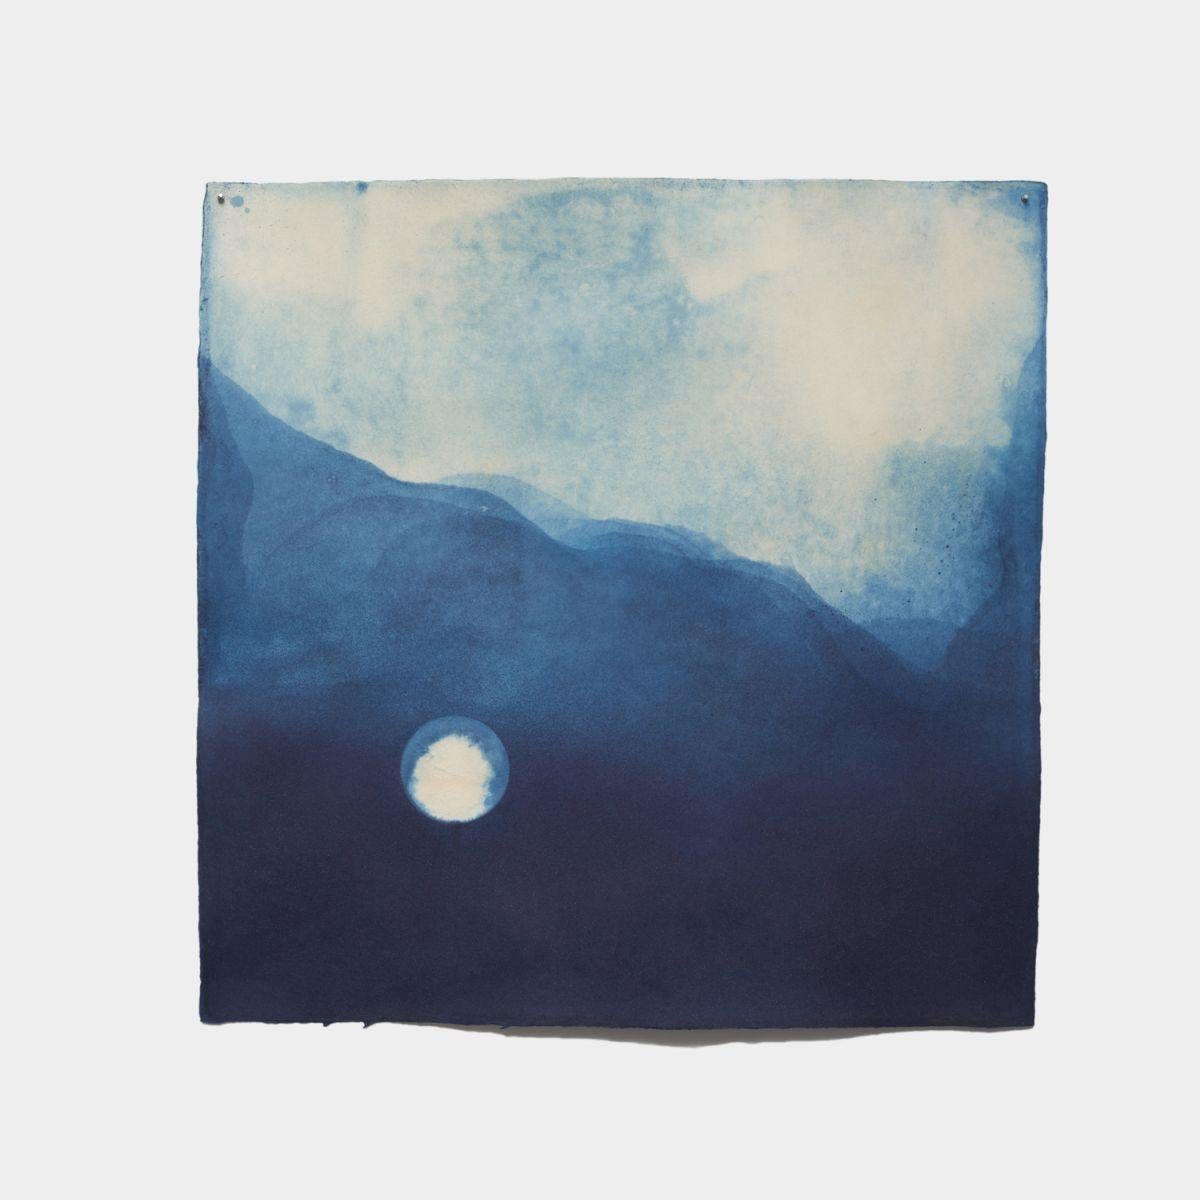 Miya Ando Landscape Painting - Natural indigo and pure silver on paper, painting of the moon over the mountains